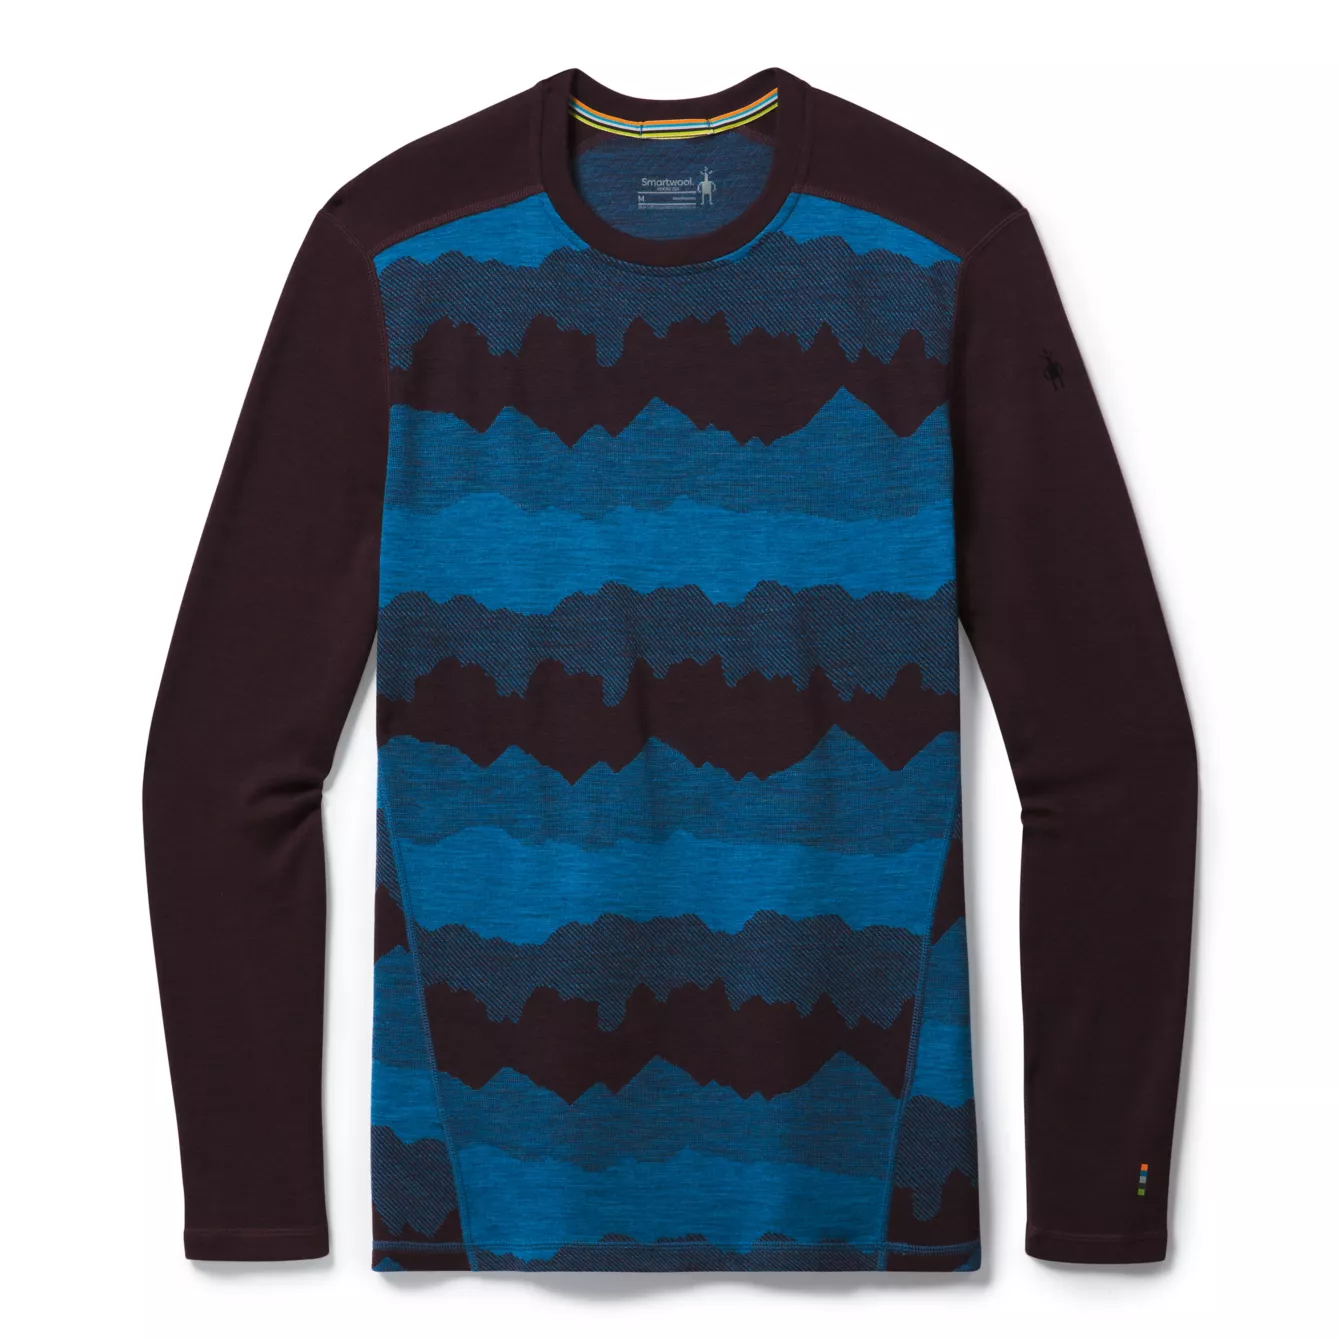 https://activejunky-cdn.s3.amazonaws.com/aj-content/smartwool-Merino-250-Base-Layer-Pattern-Crew-3.png